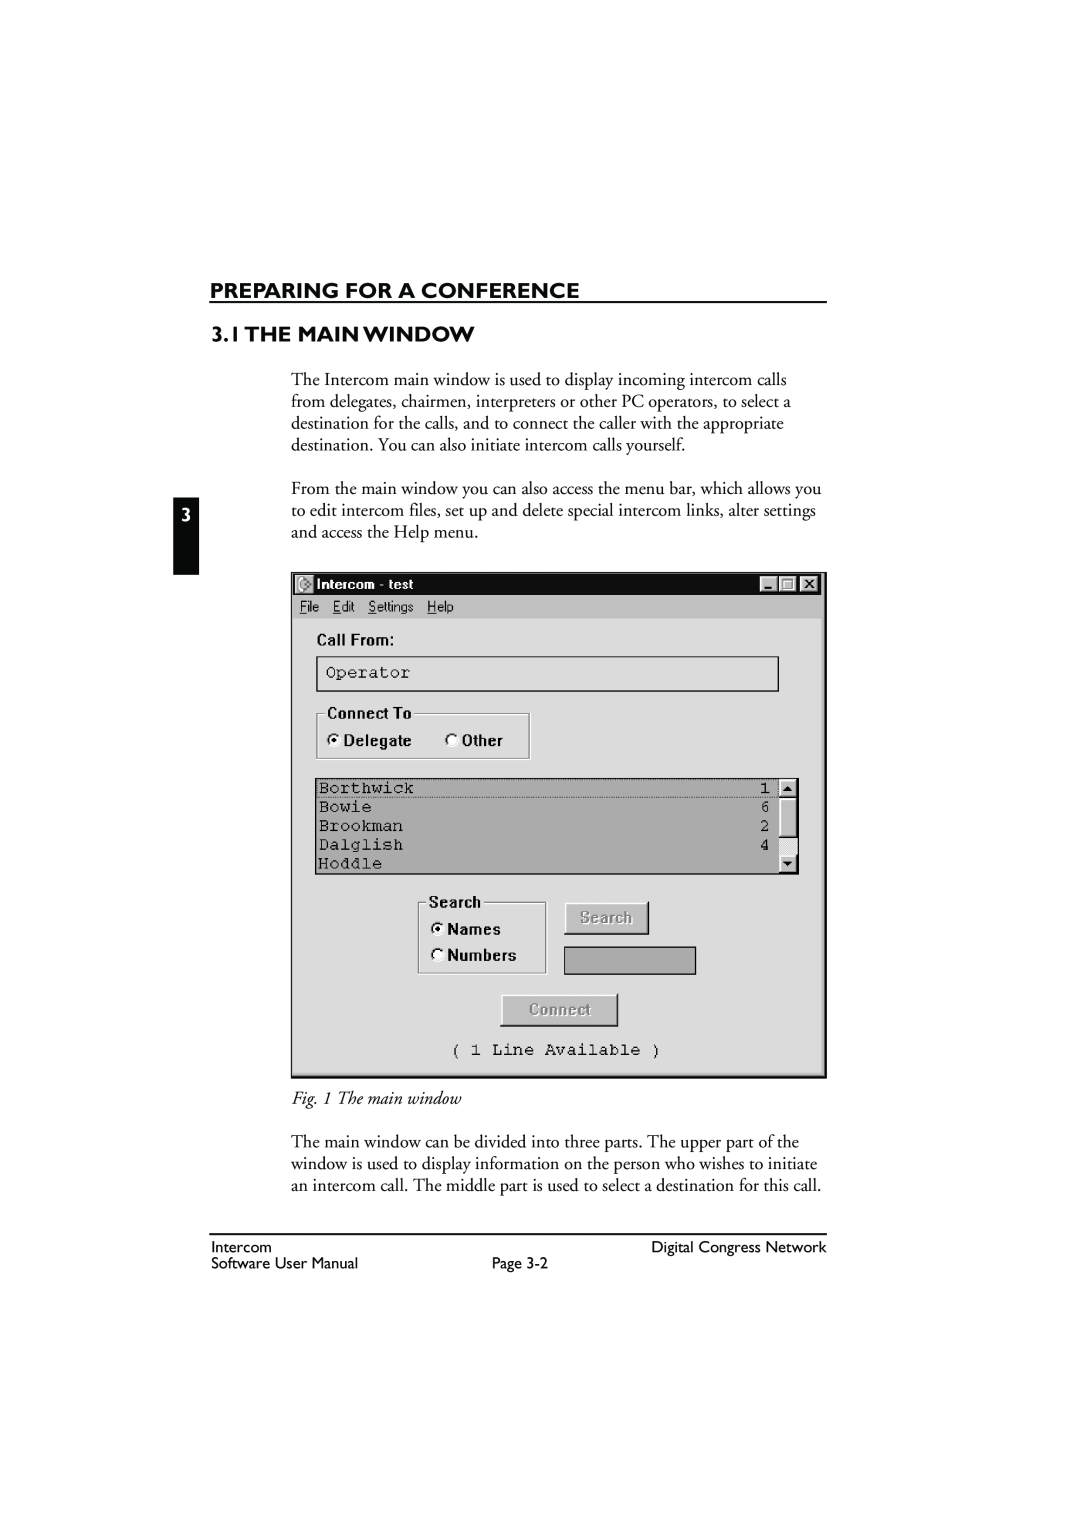 Bosch Appliances LBB 3573 user manual PREPARING FOR A CONFERENCE 3.1 THE MAIN WINDOW, The main window 